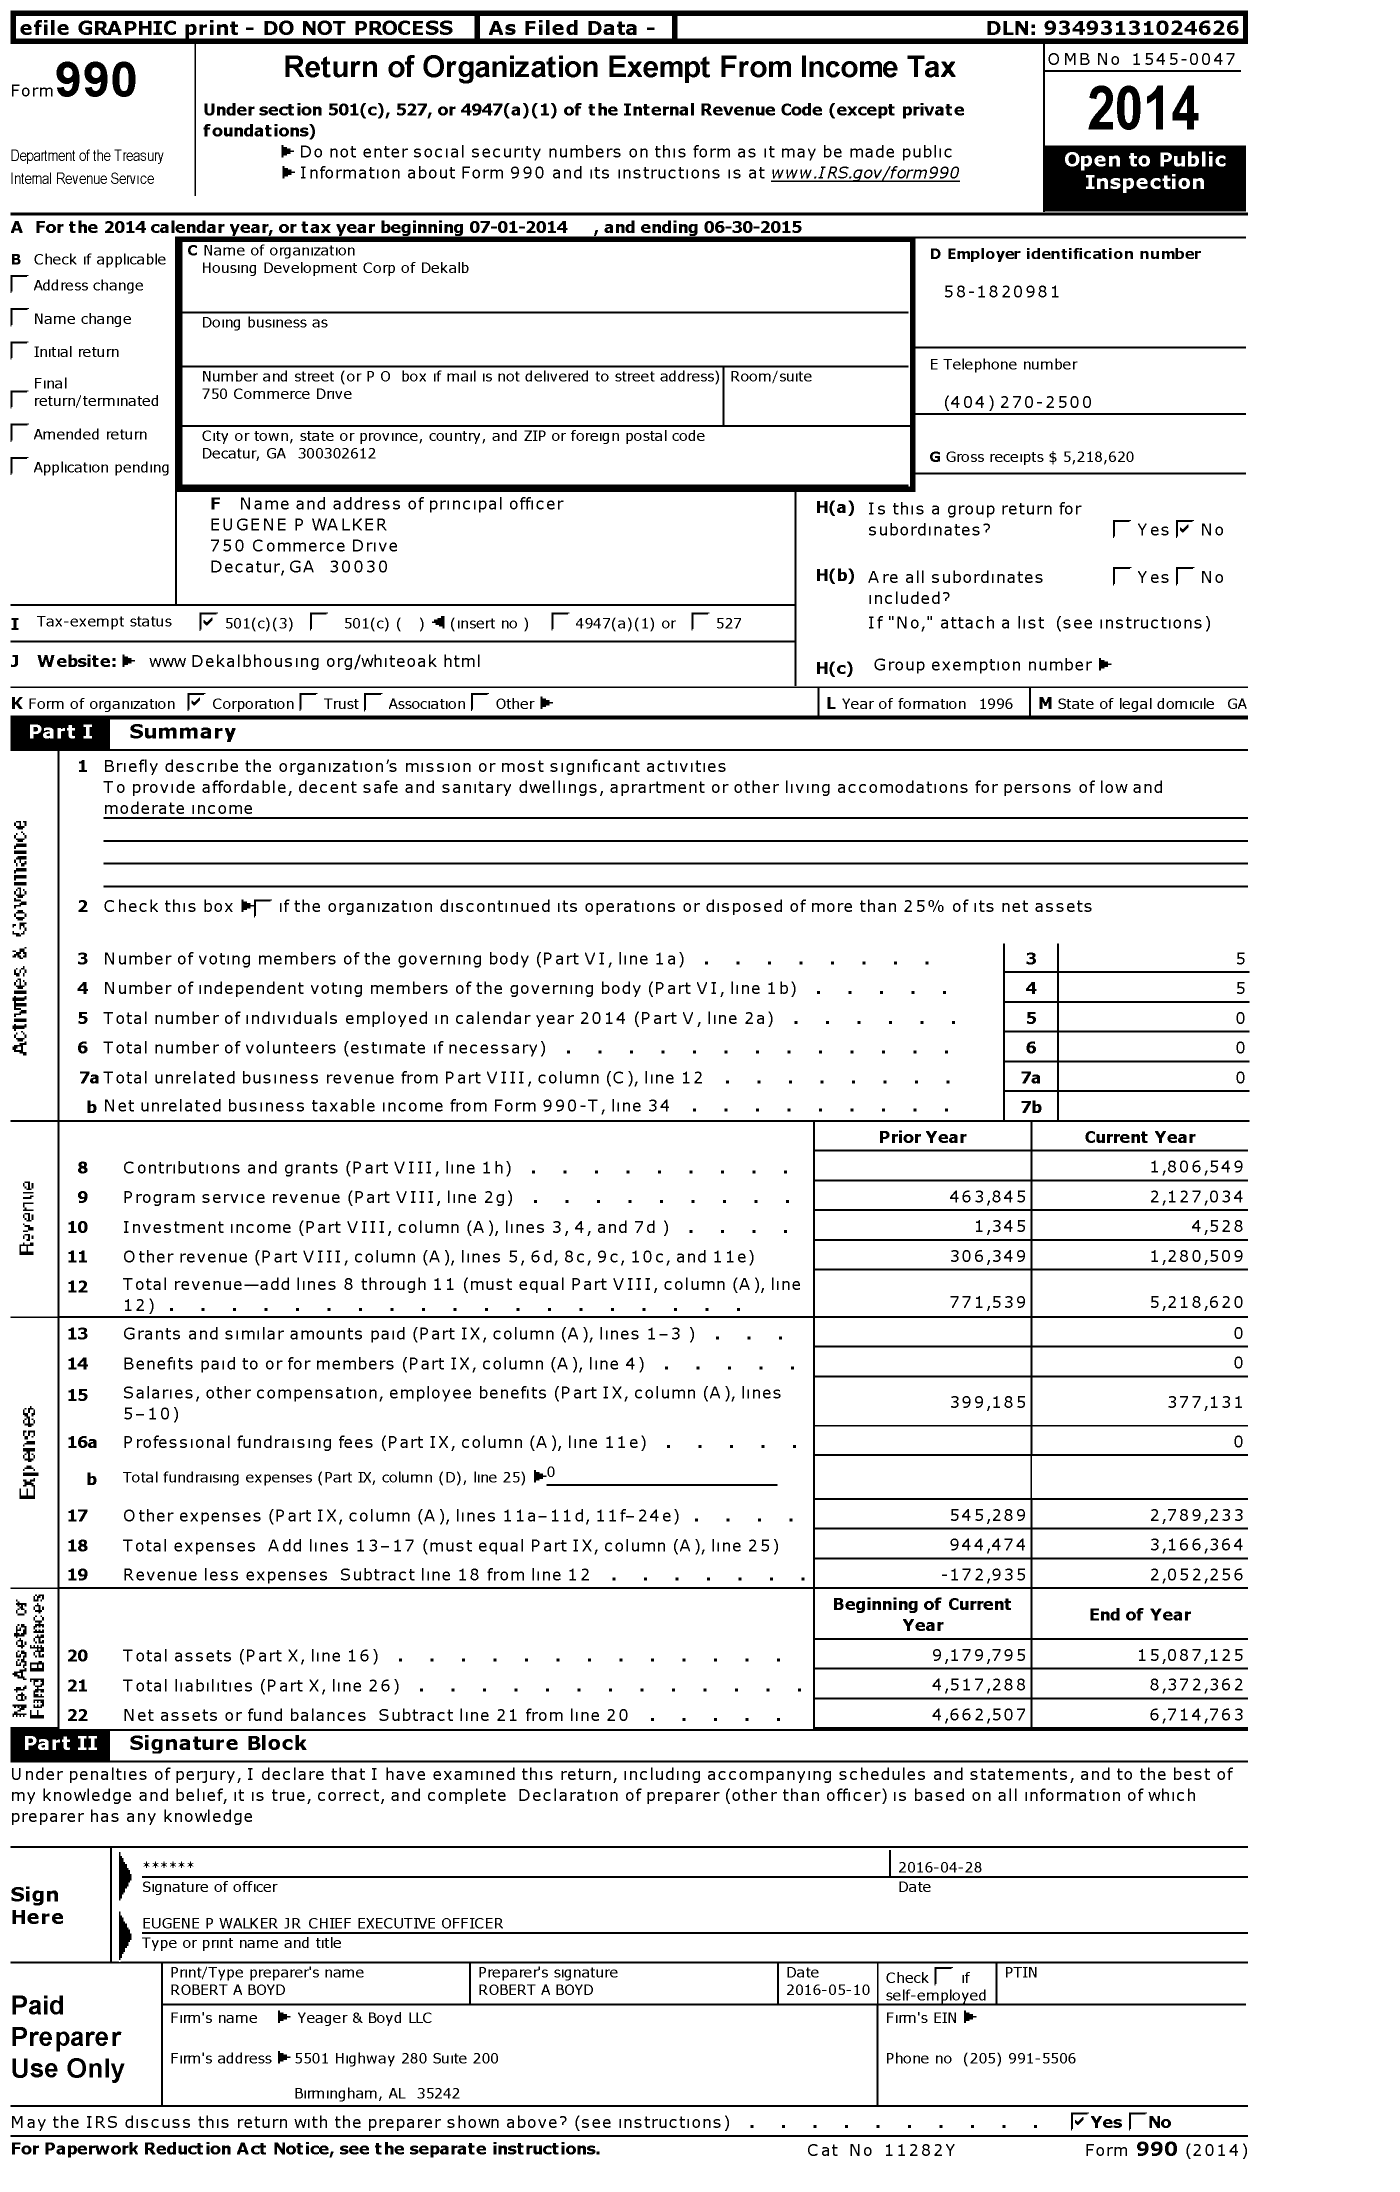 Image of first page of 2014 Form 990 for Housing Development Corporation of Dekalb (HDC)